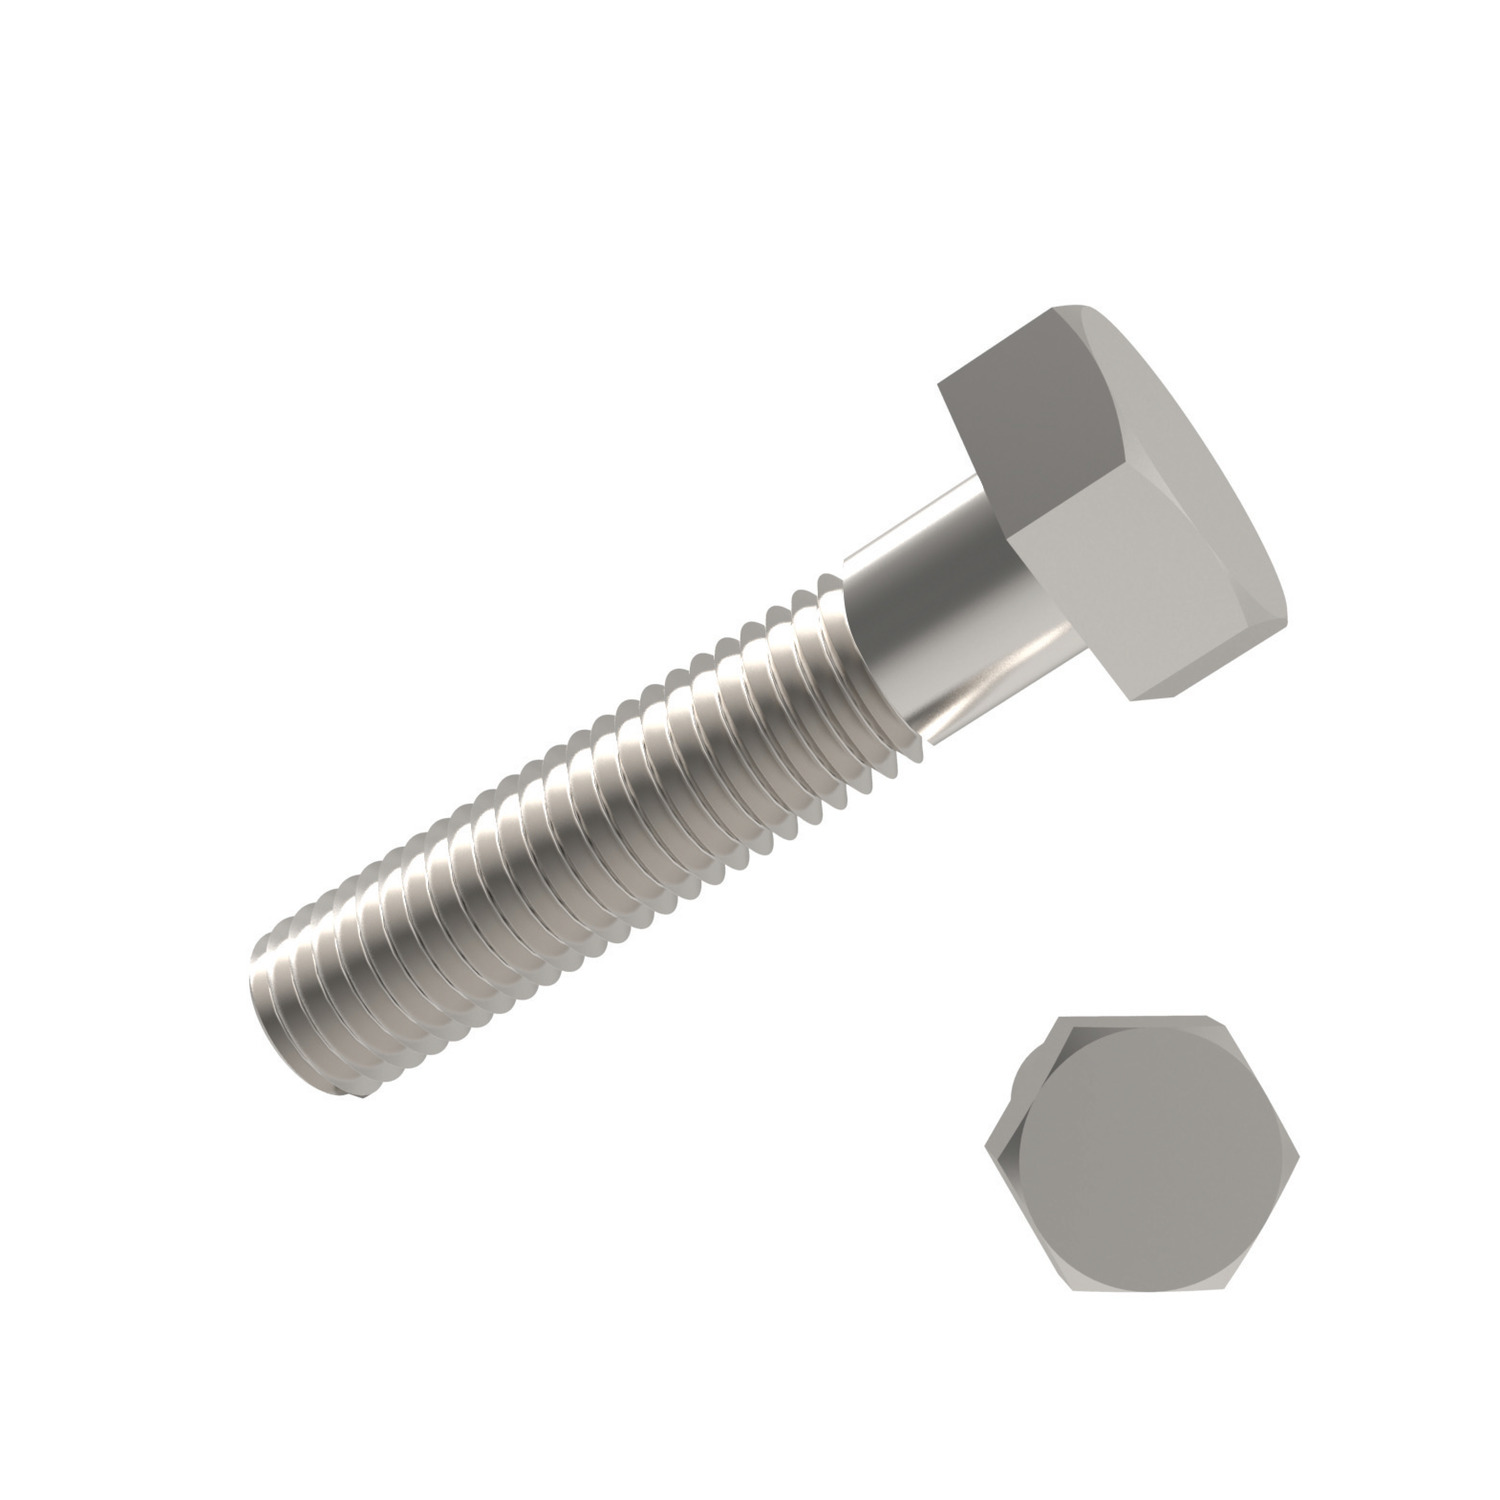 Hexagon Head Bolts A2 stainless steel hexagon head bolts. Manufactured to DIN 931 / ISO 4014. Sizes range from M5 to M36.